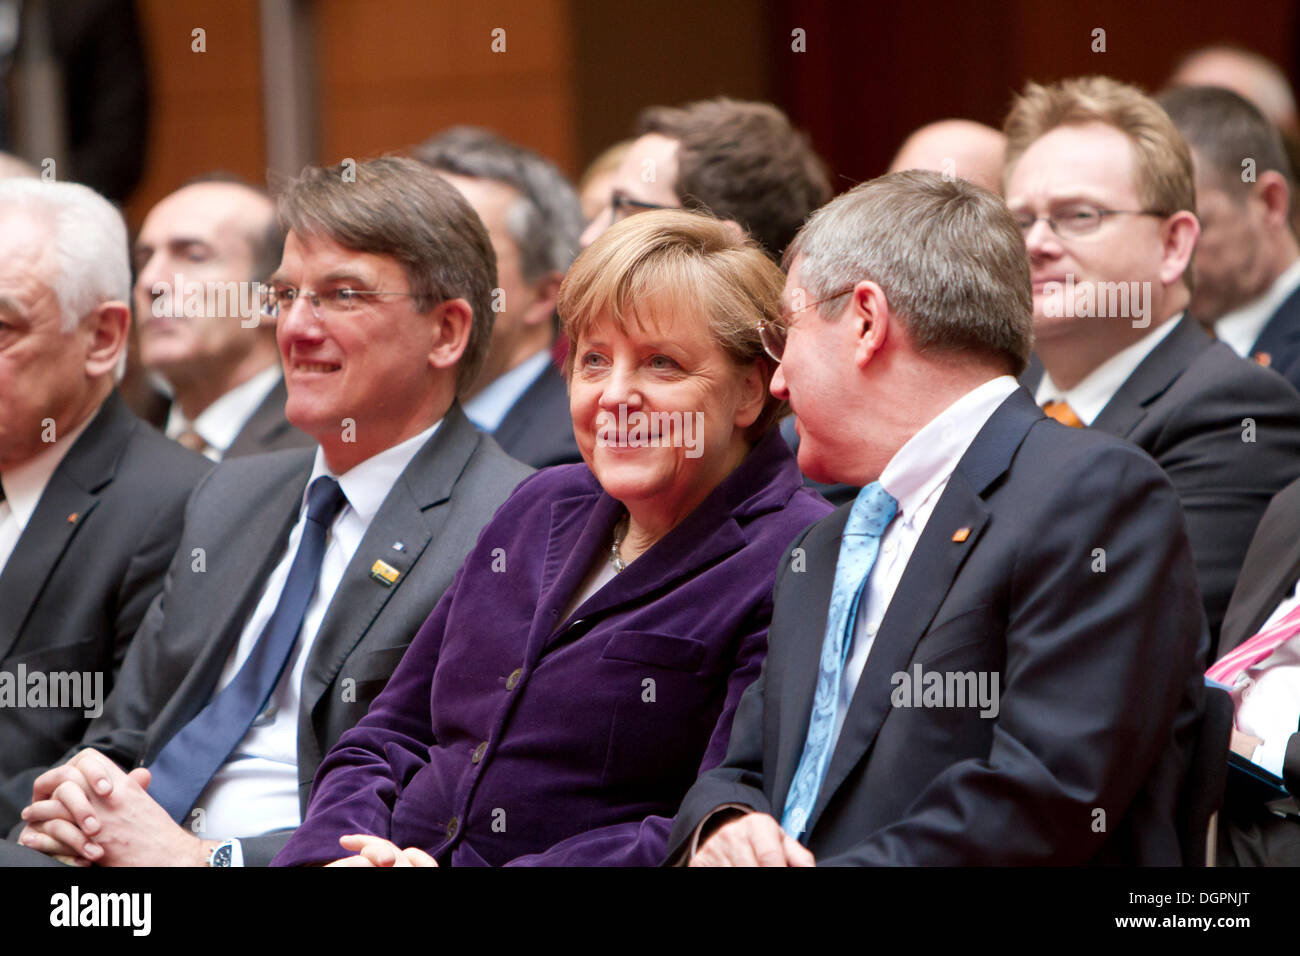 From left to right: Uwe Froehlich, President of the Federal Association of German Cooperative Banks, BVR, Angela Merkel, German Stock Photo